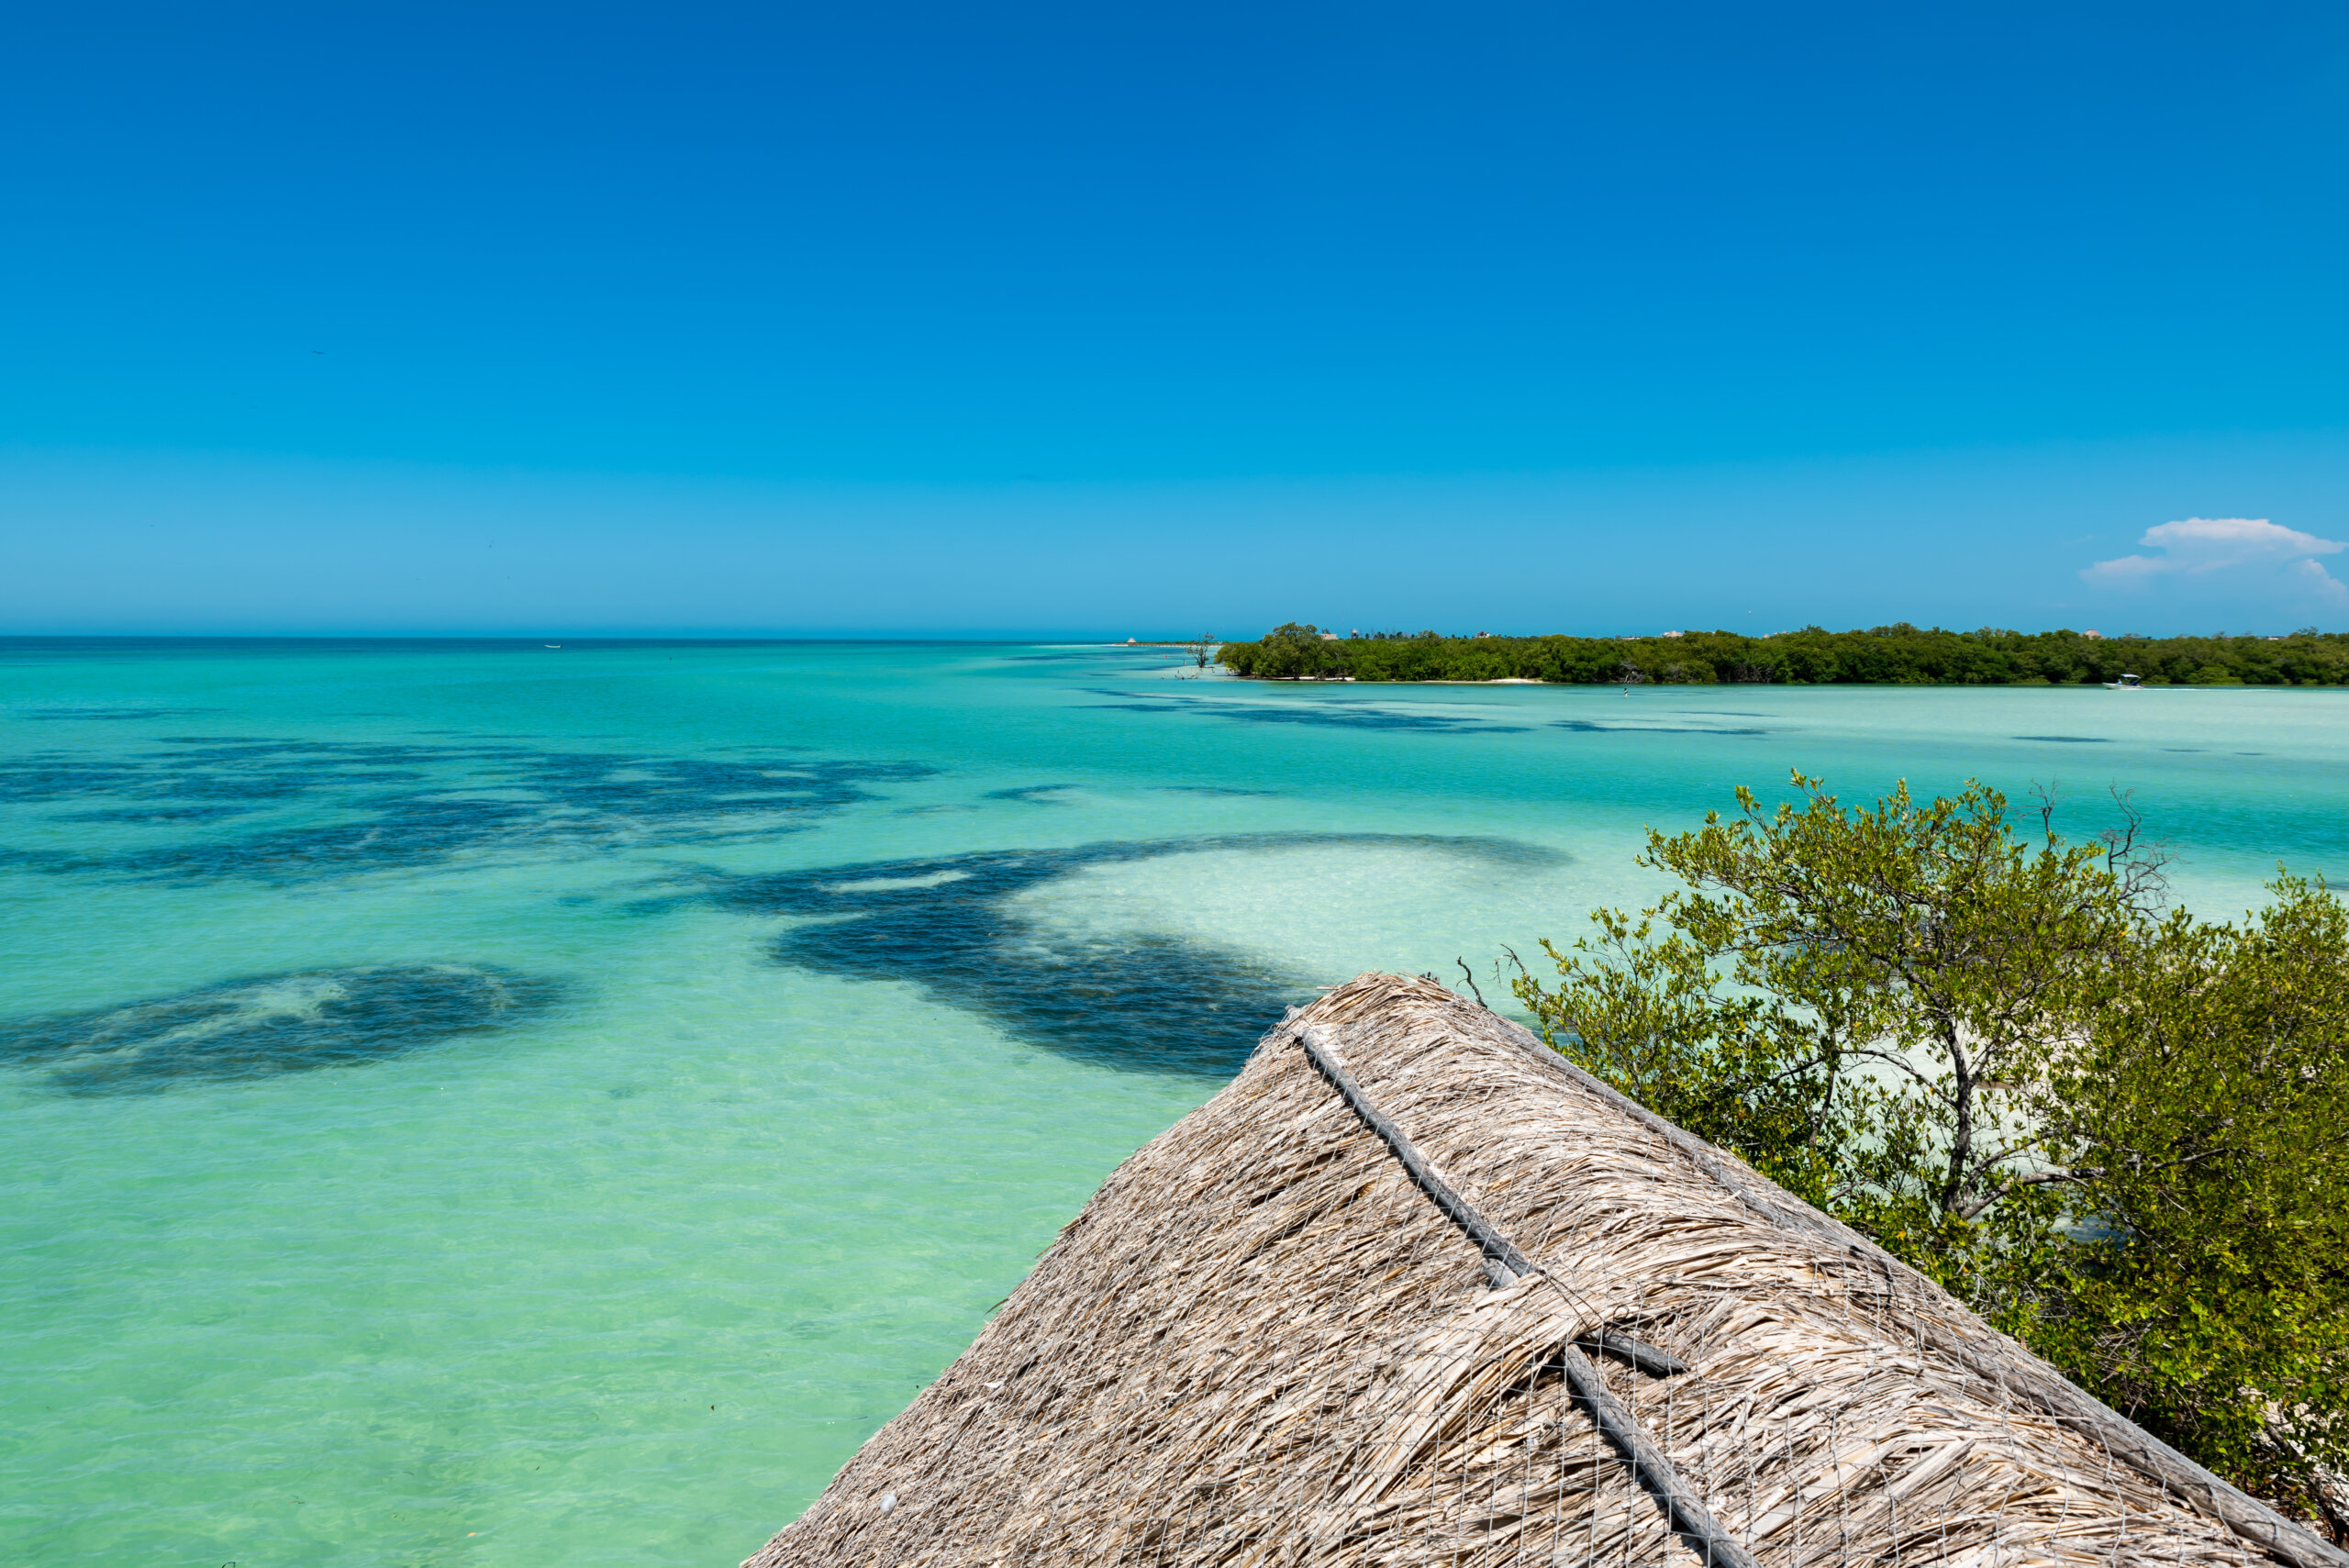 Tropical seascape in the "Yum Balam" nature reserve (Holbox island, Quintana Roo, Mexico).